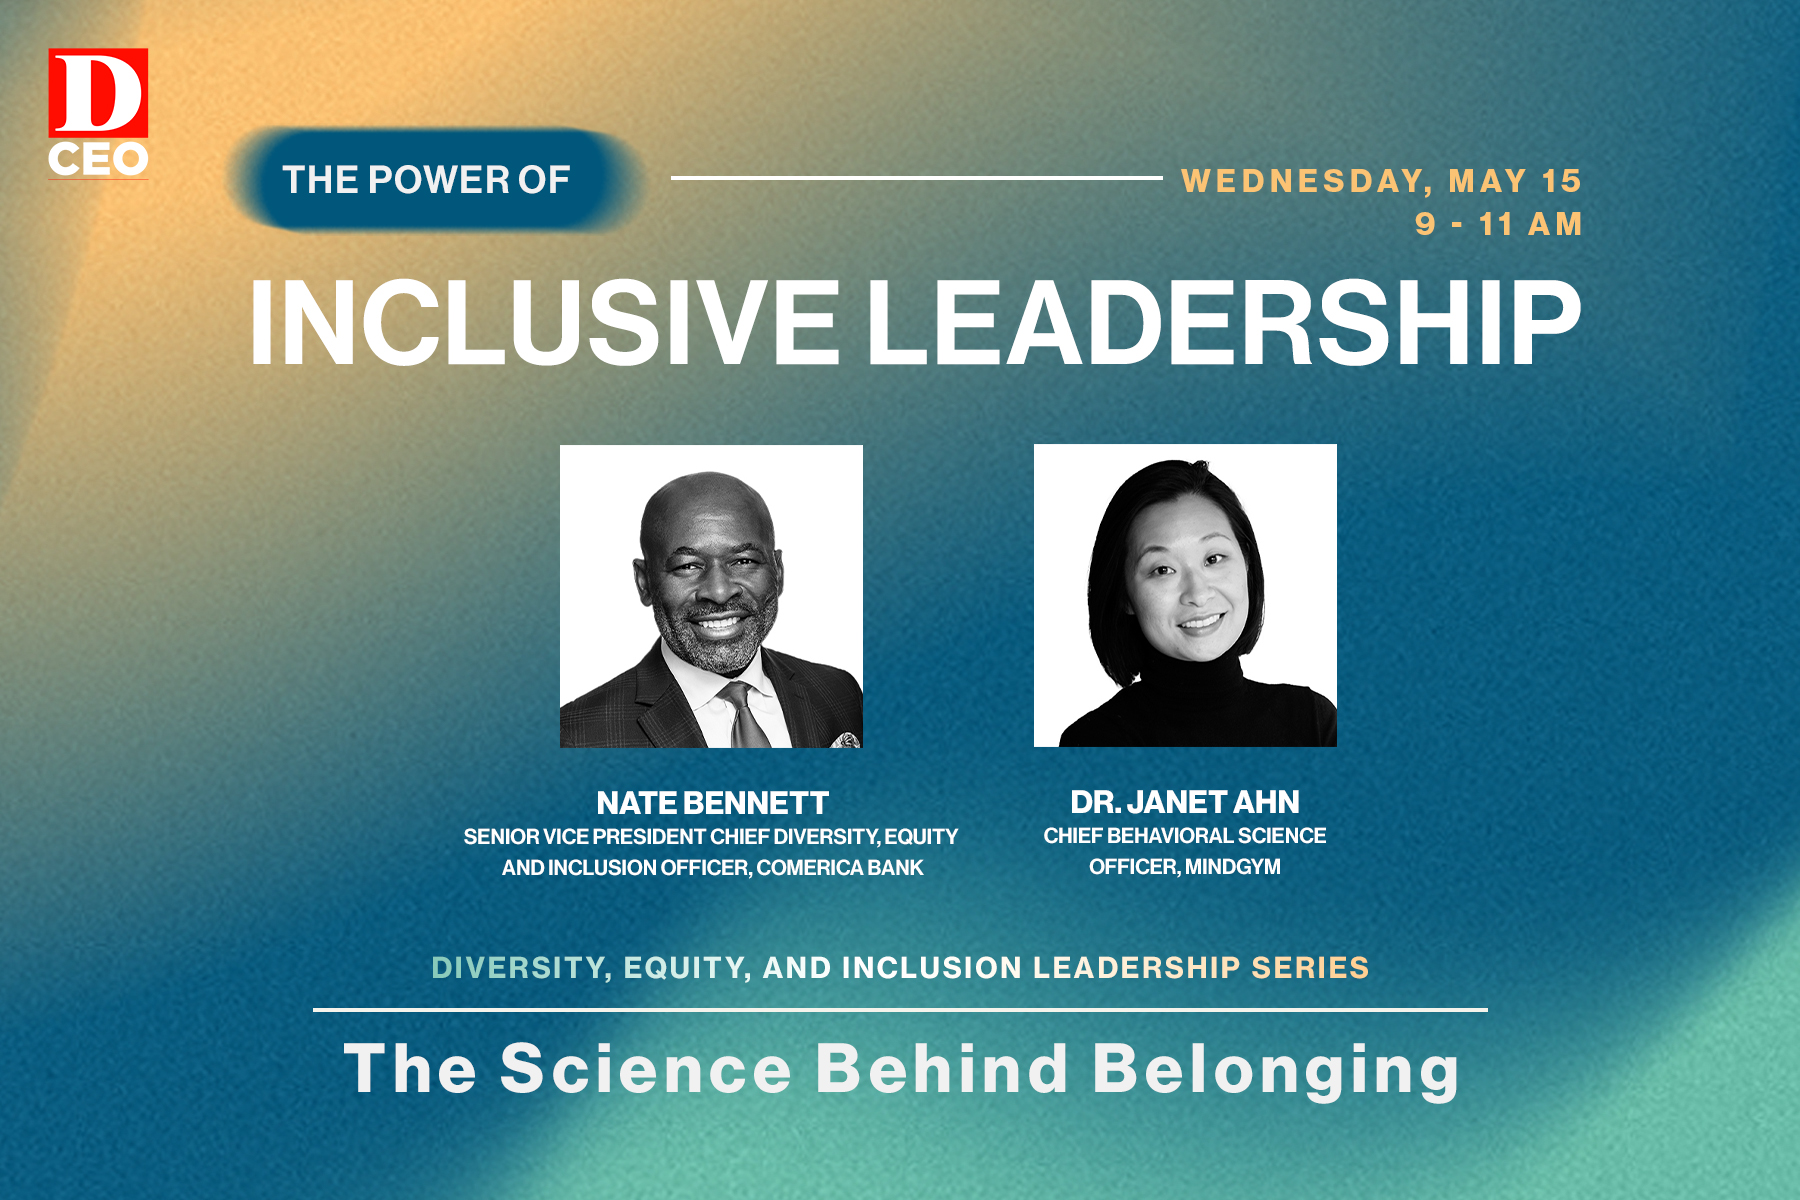 The Power of Inclusive Leadership: Unveiling the Science Behind Belonging by D CEO